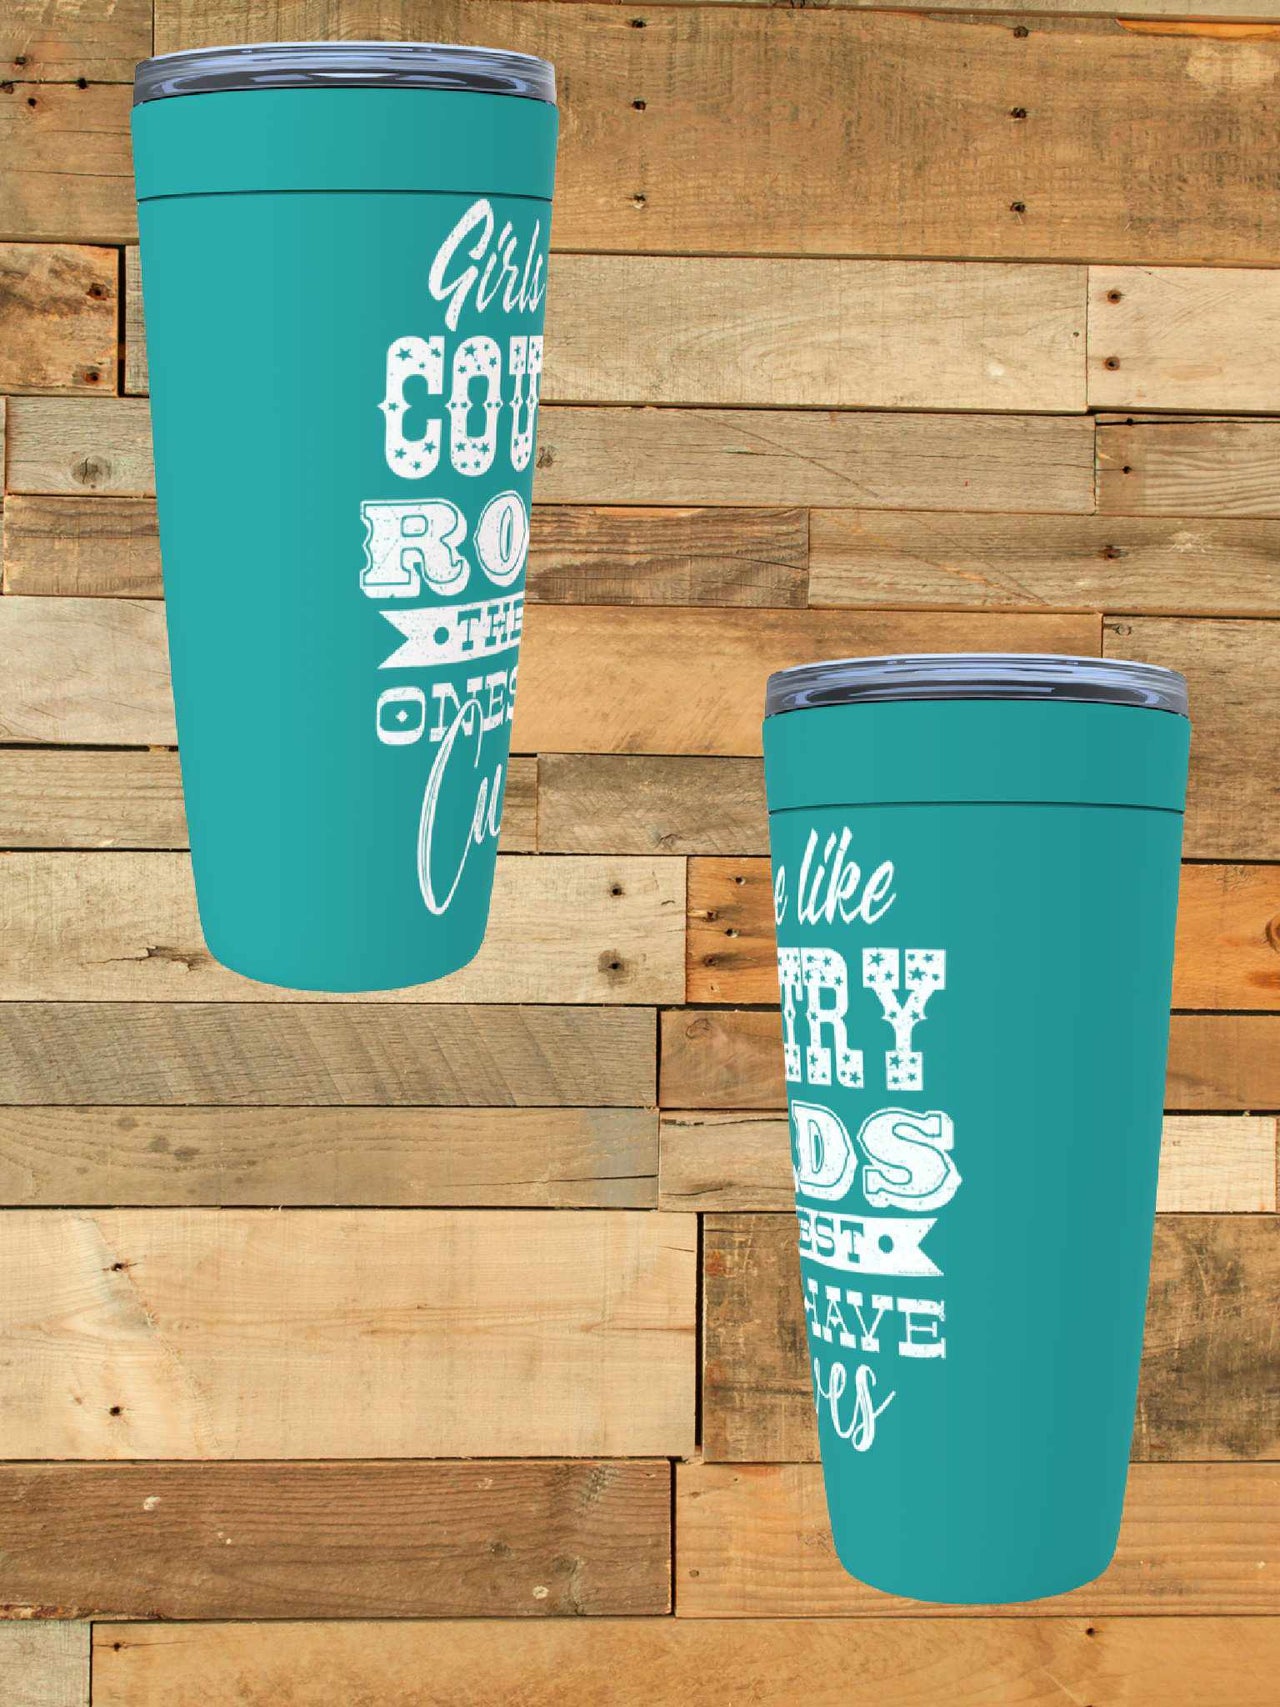 Try That in A Small Town Tumblers — Craft Country by Norma